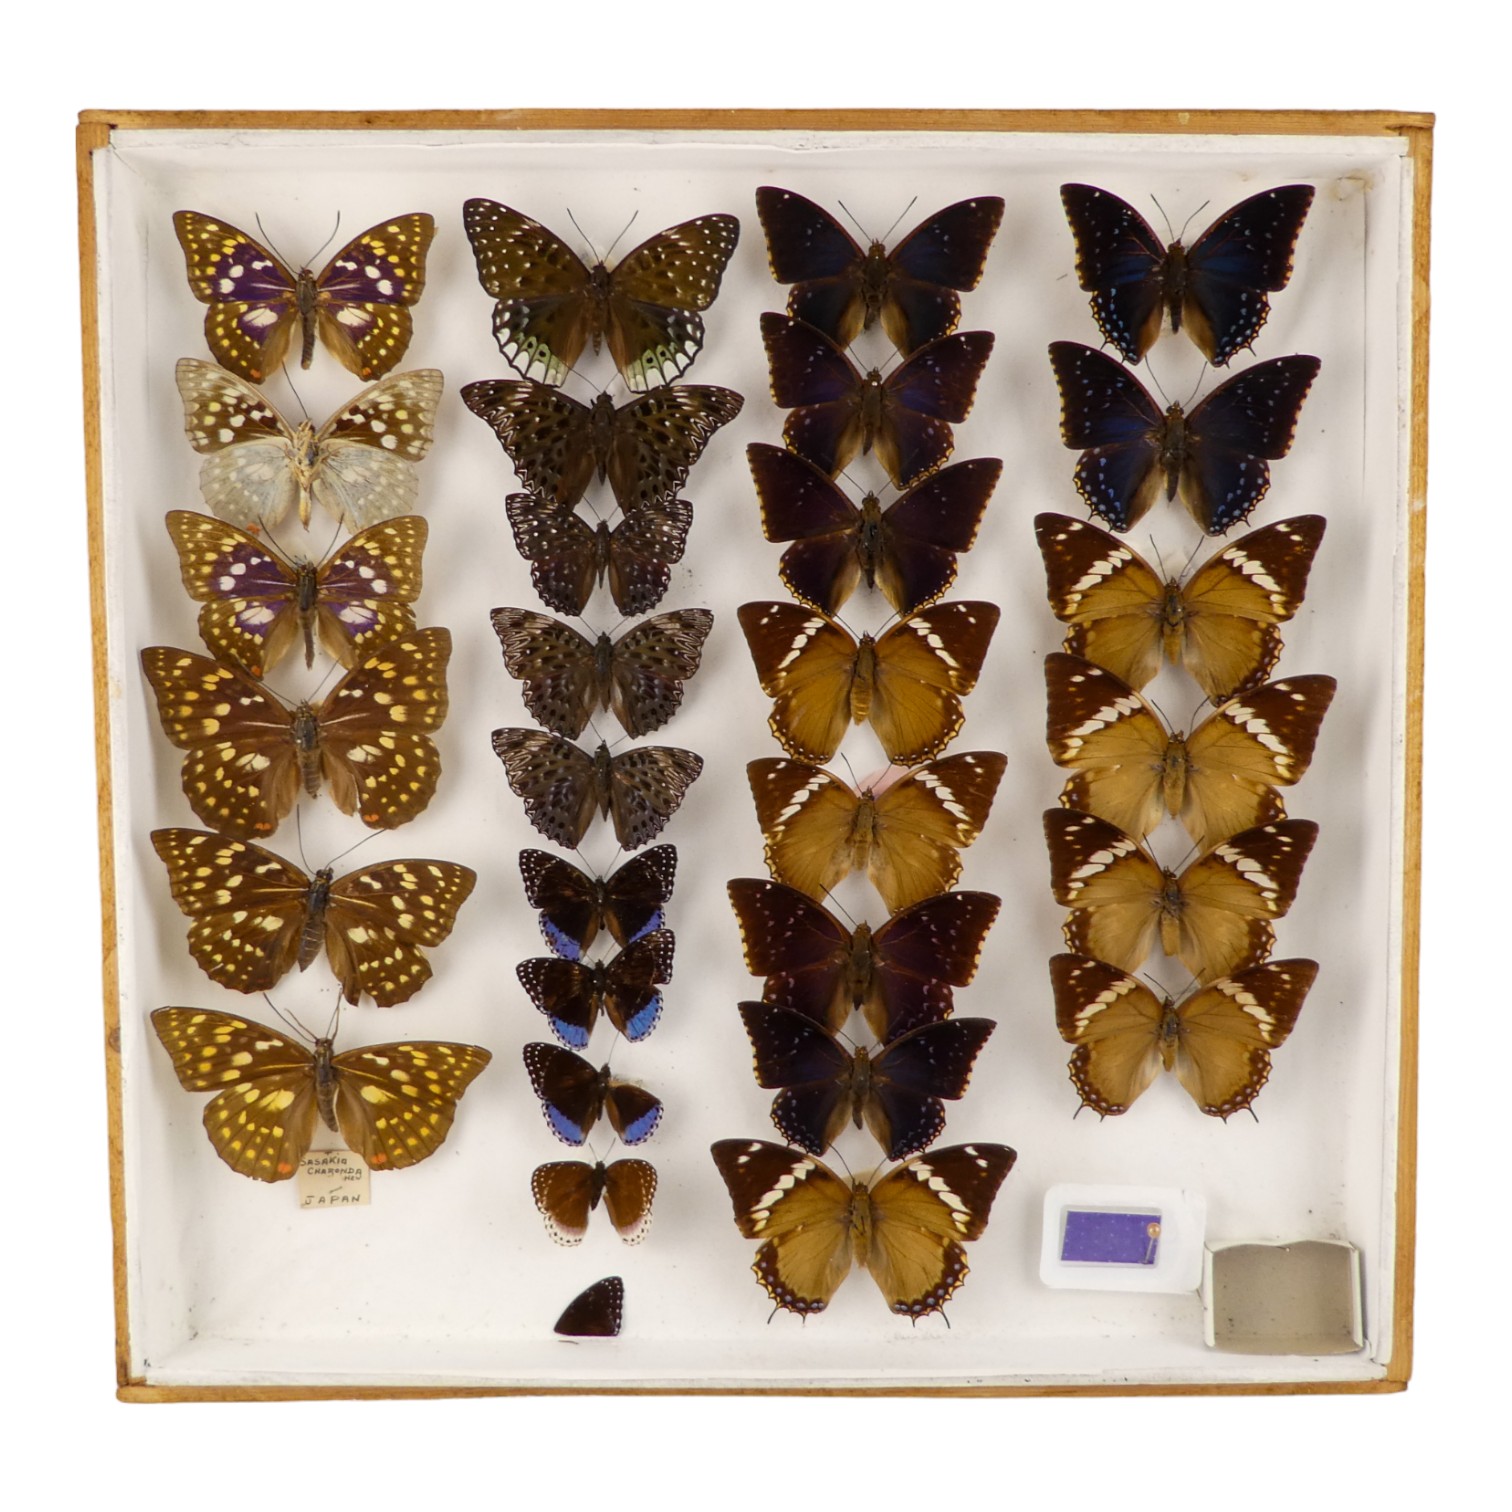 A case of butterflies in four rows - including Charaxes Cedreatis, White Edged Constable and